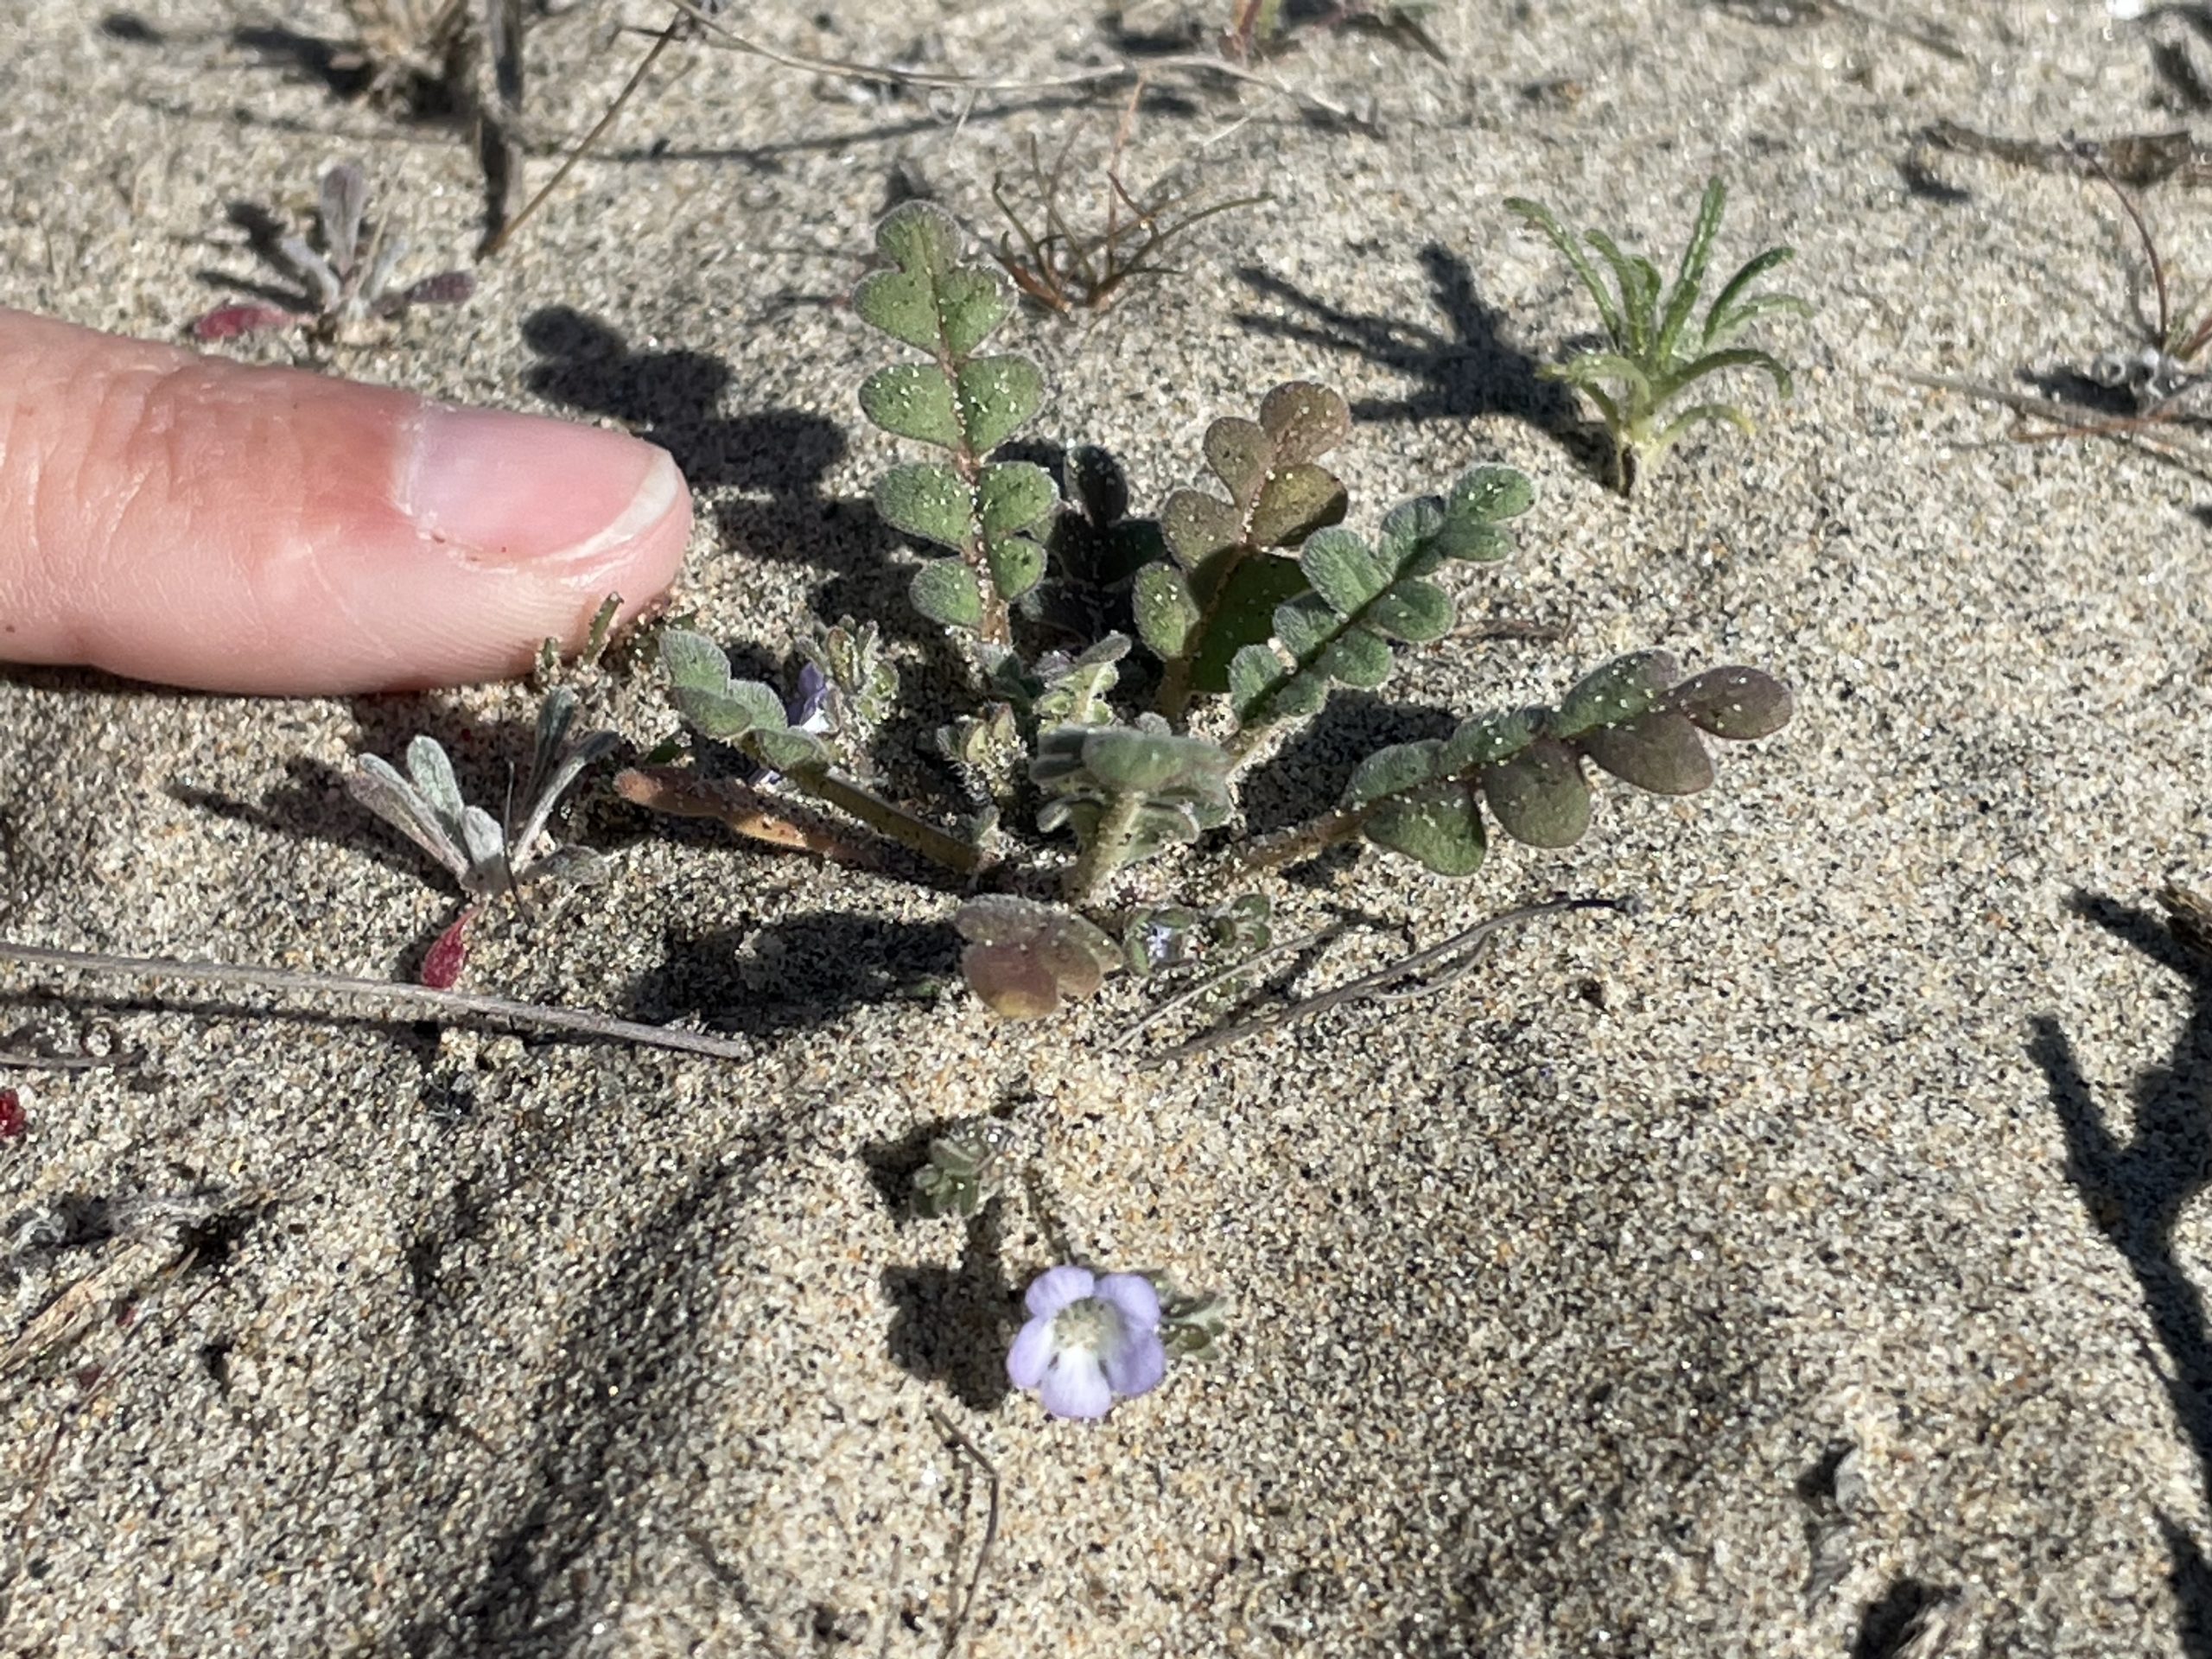 Image of Brand's star phacelia (Phacelia stellaris), one of the binational species Sula is working to protect.